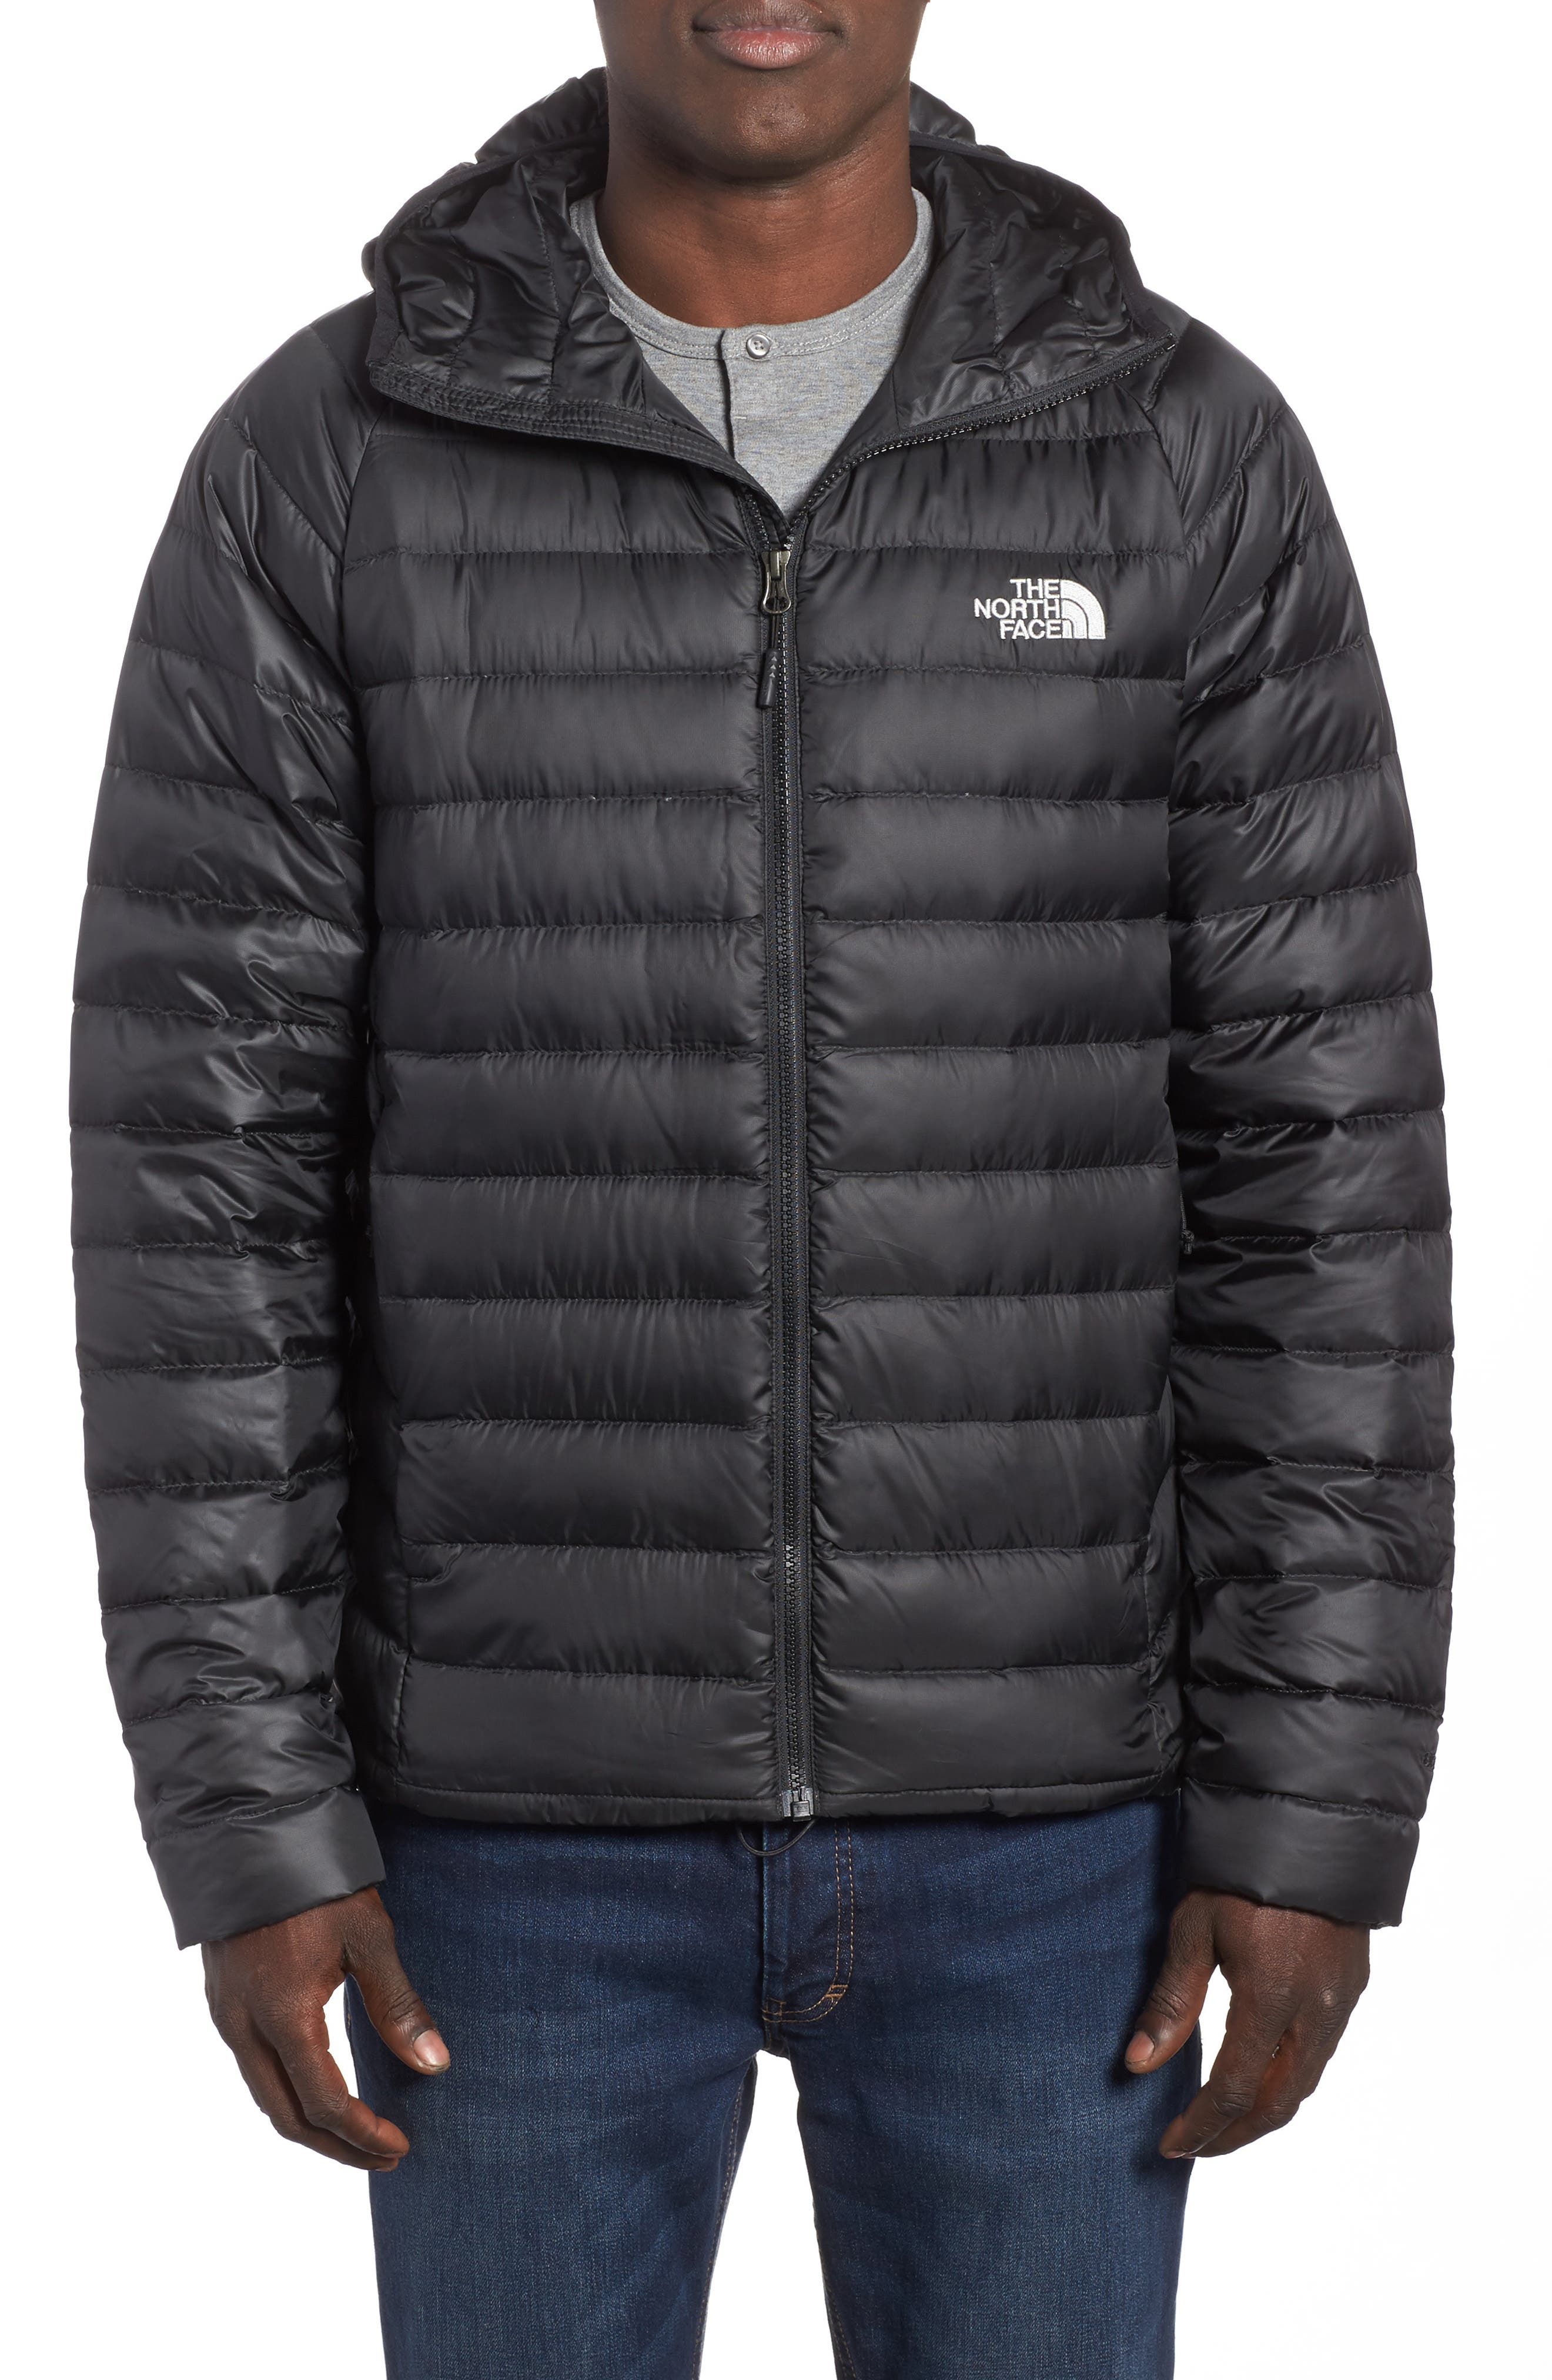 the north face trevail 800